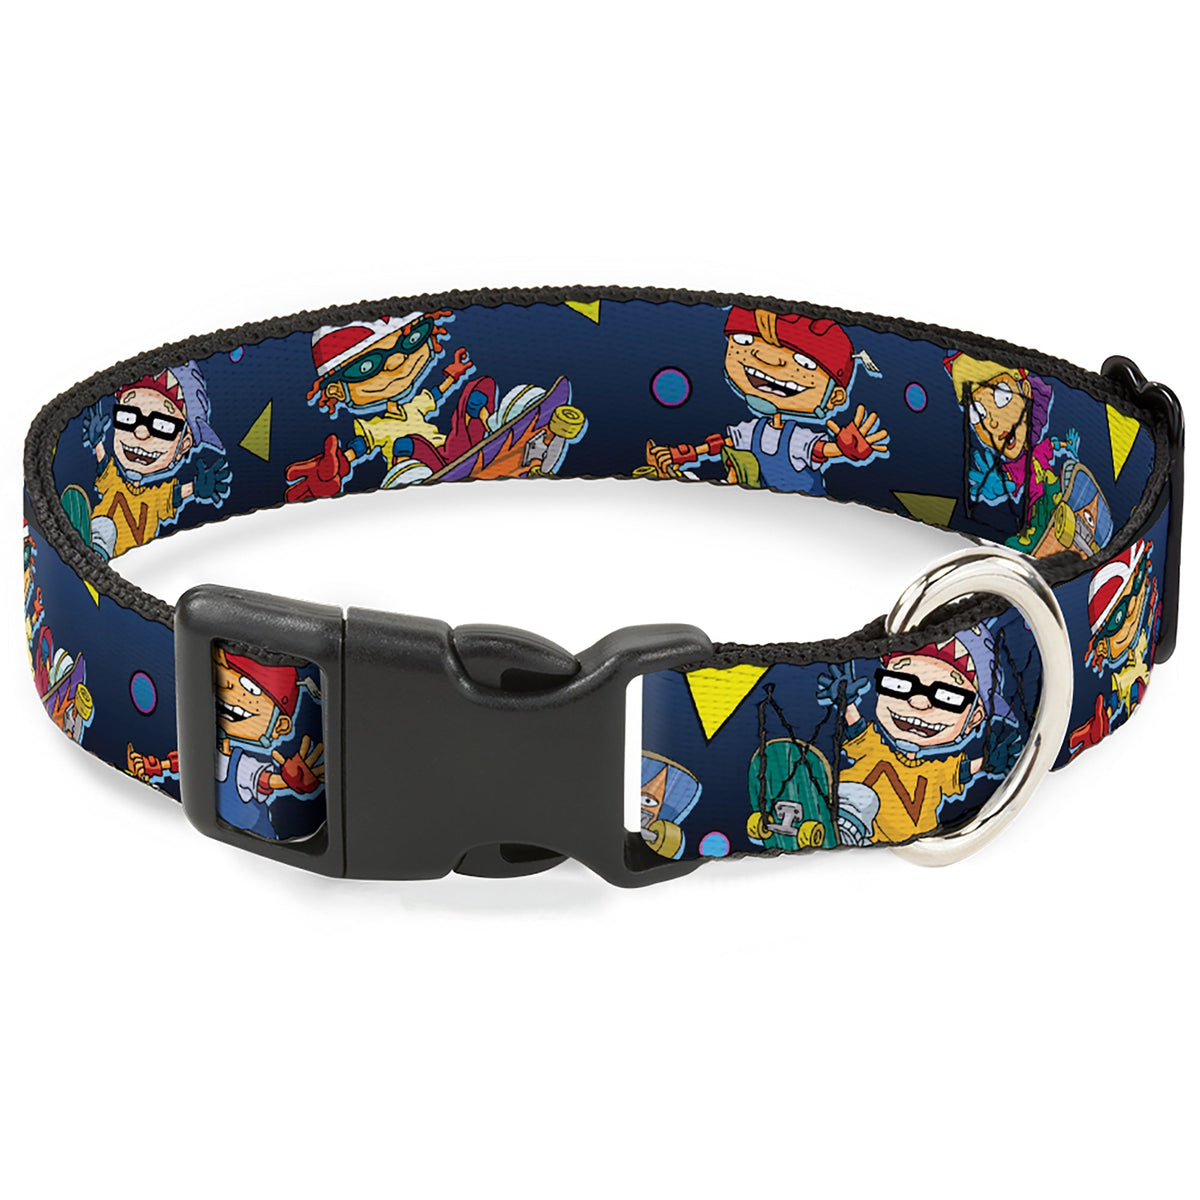 Plastic Clip Collar - Rocket Power 4-Character Action Poses/Shapes Cool Gray/Multi Color